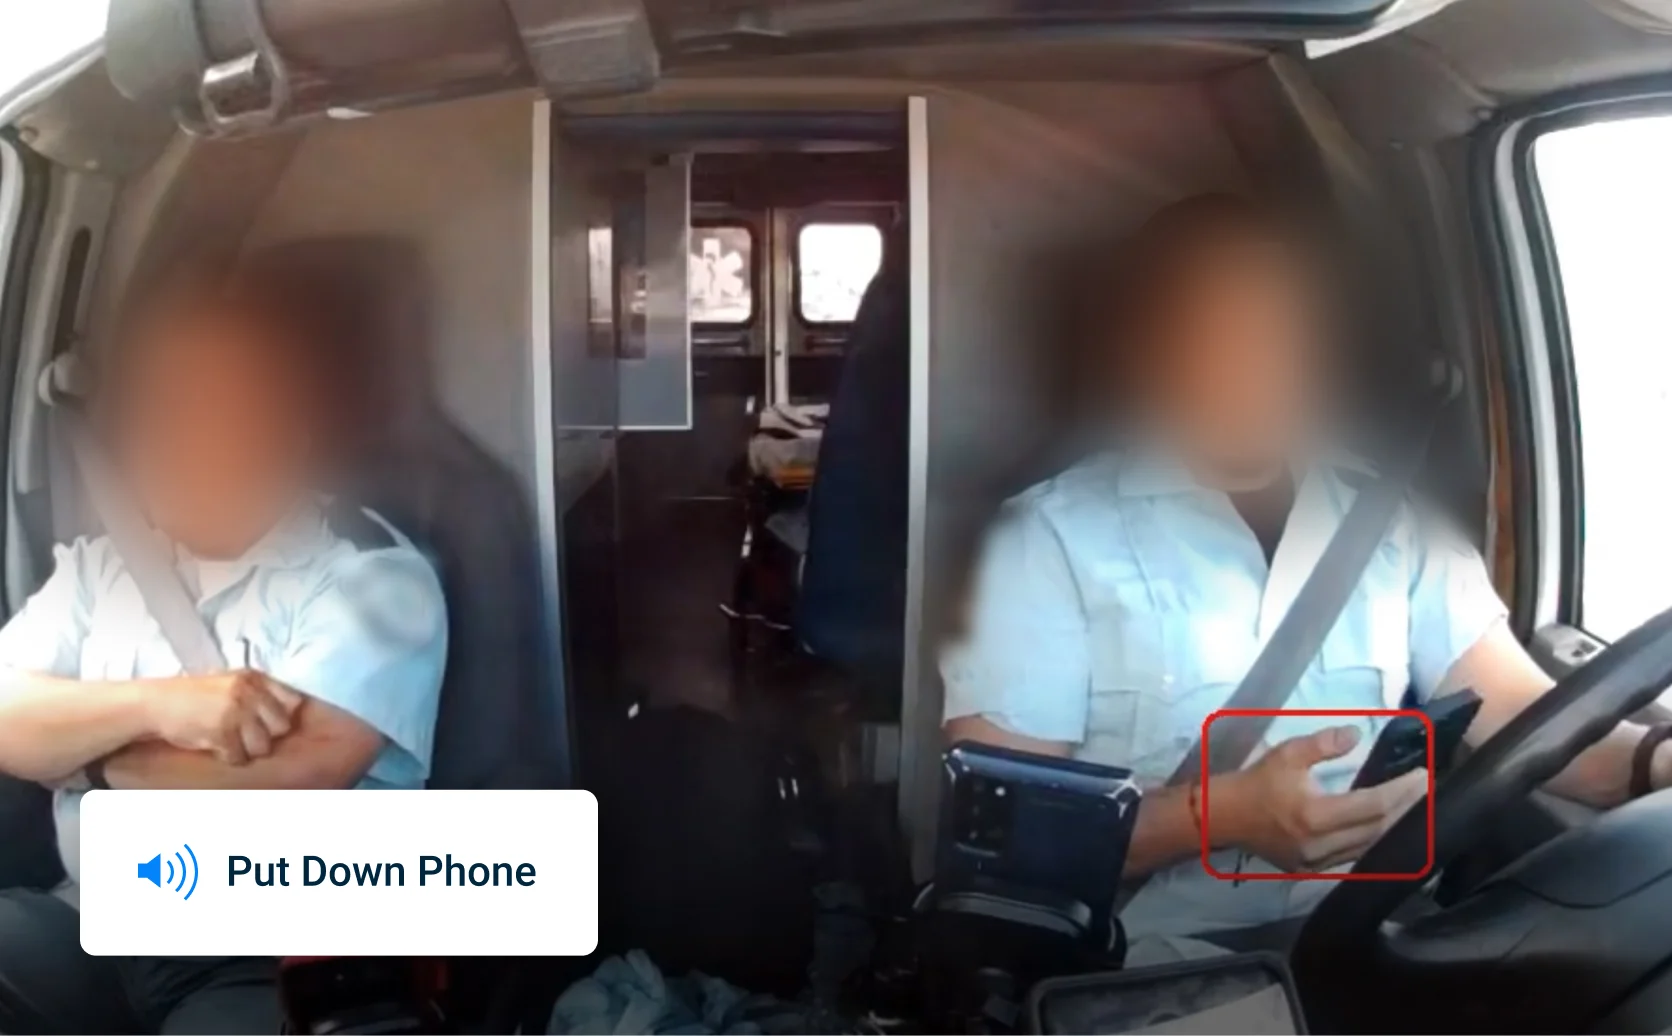 Image of driver using a mobile device. Overlay of alert sent to their mobile device stating to “put down the phone.”